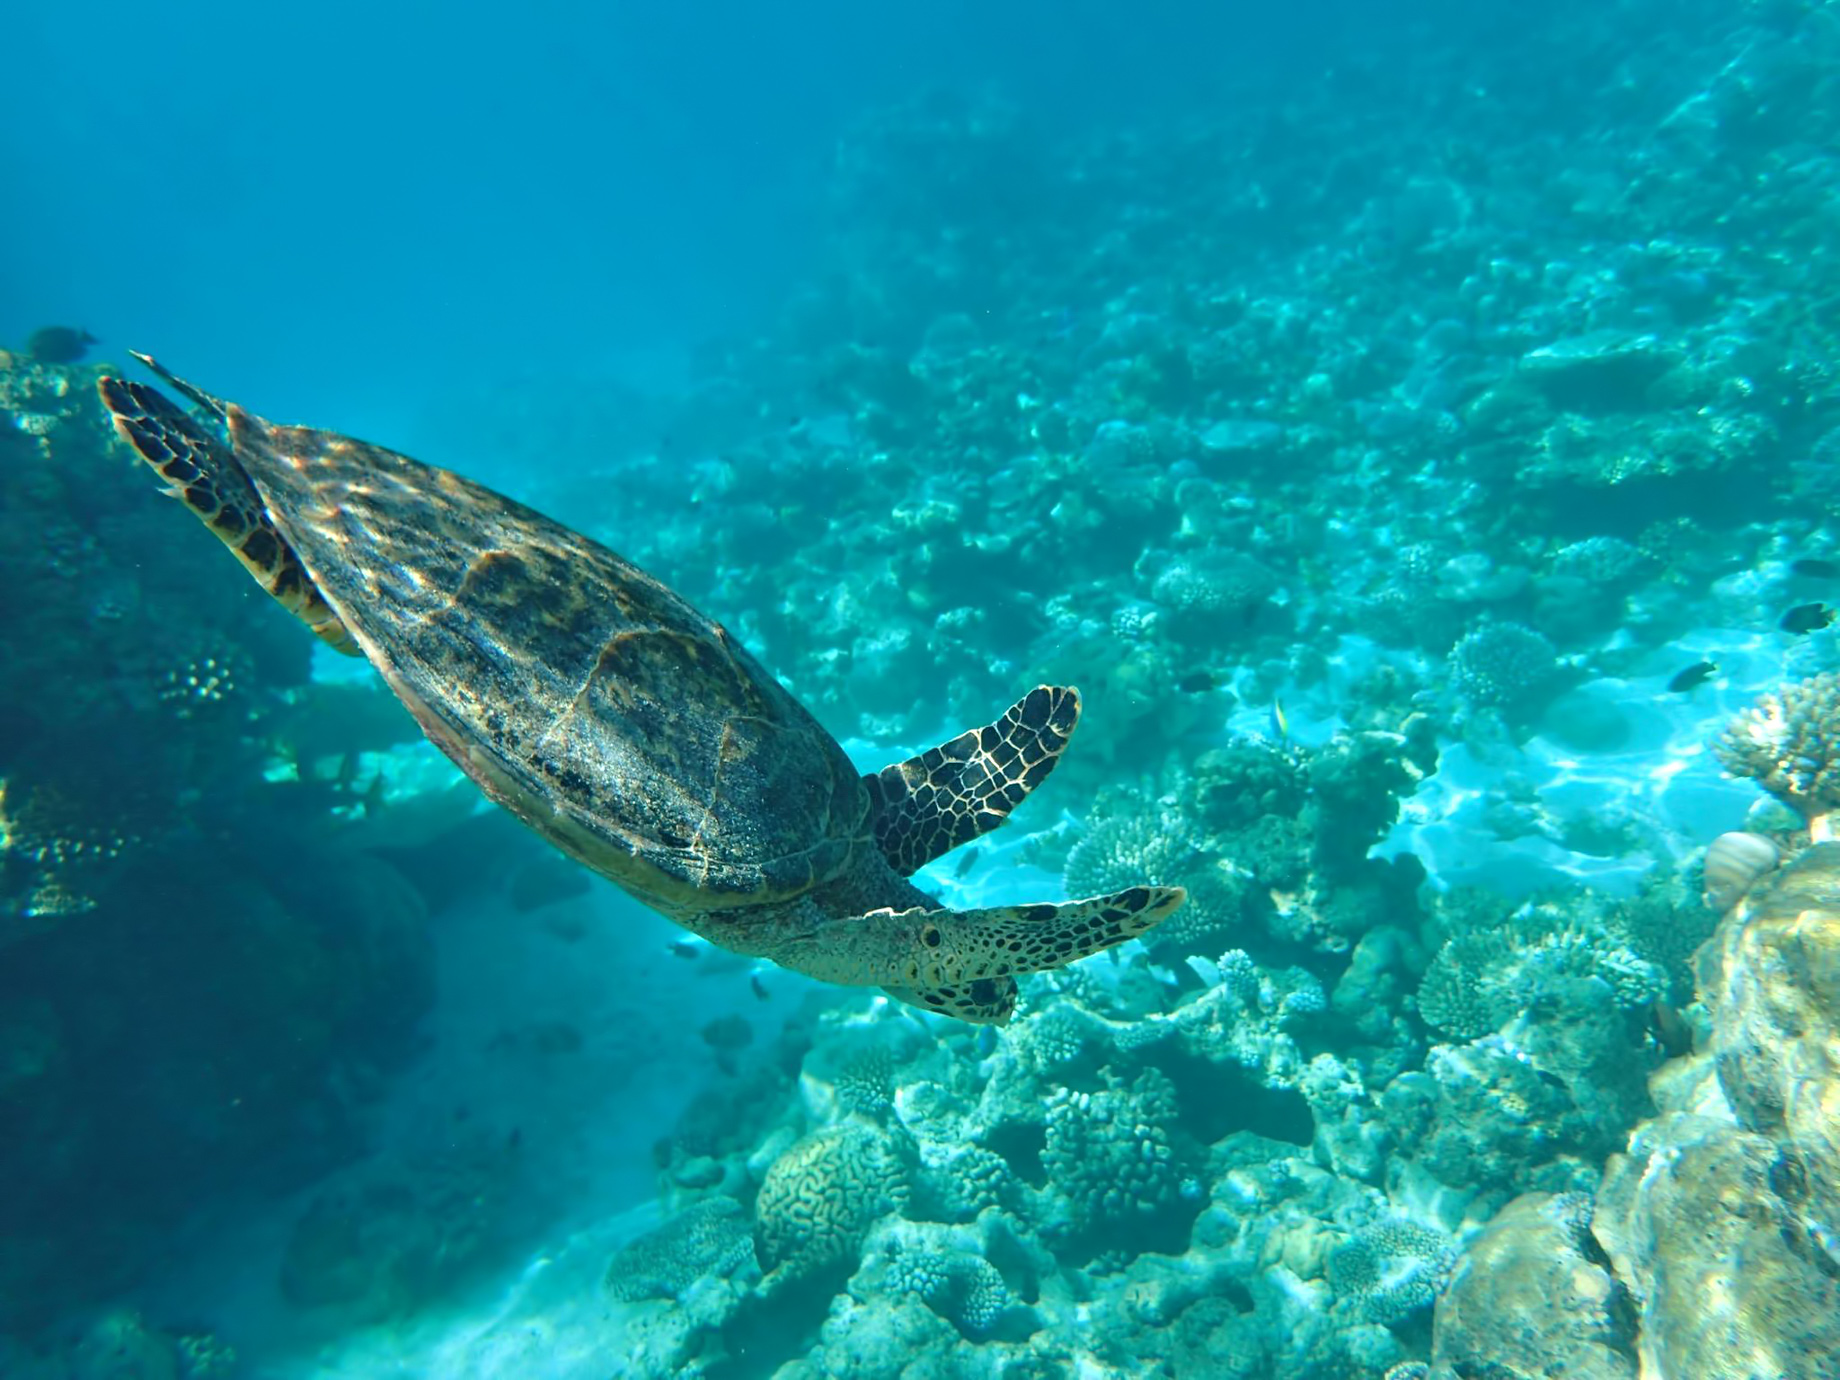 One&Only Reethi Rah Resort – North Male Atoll, Maldives – Underwater Sea Turtle